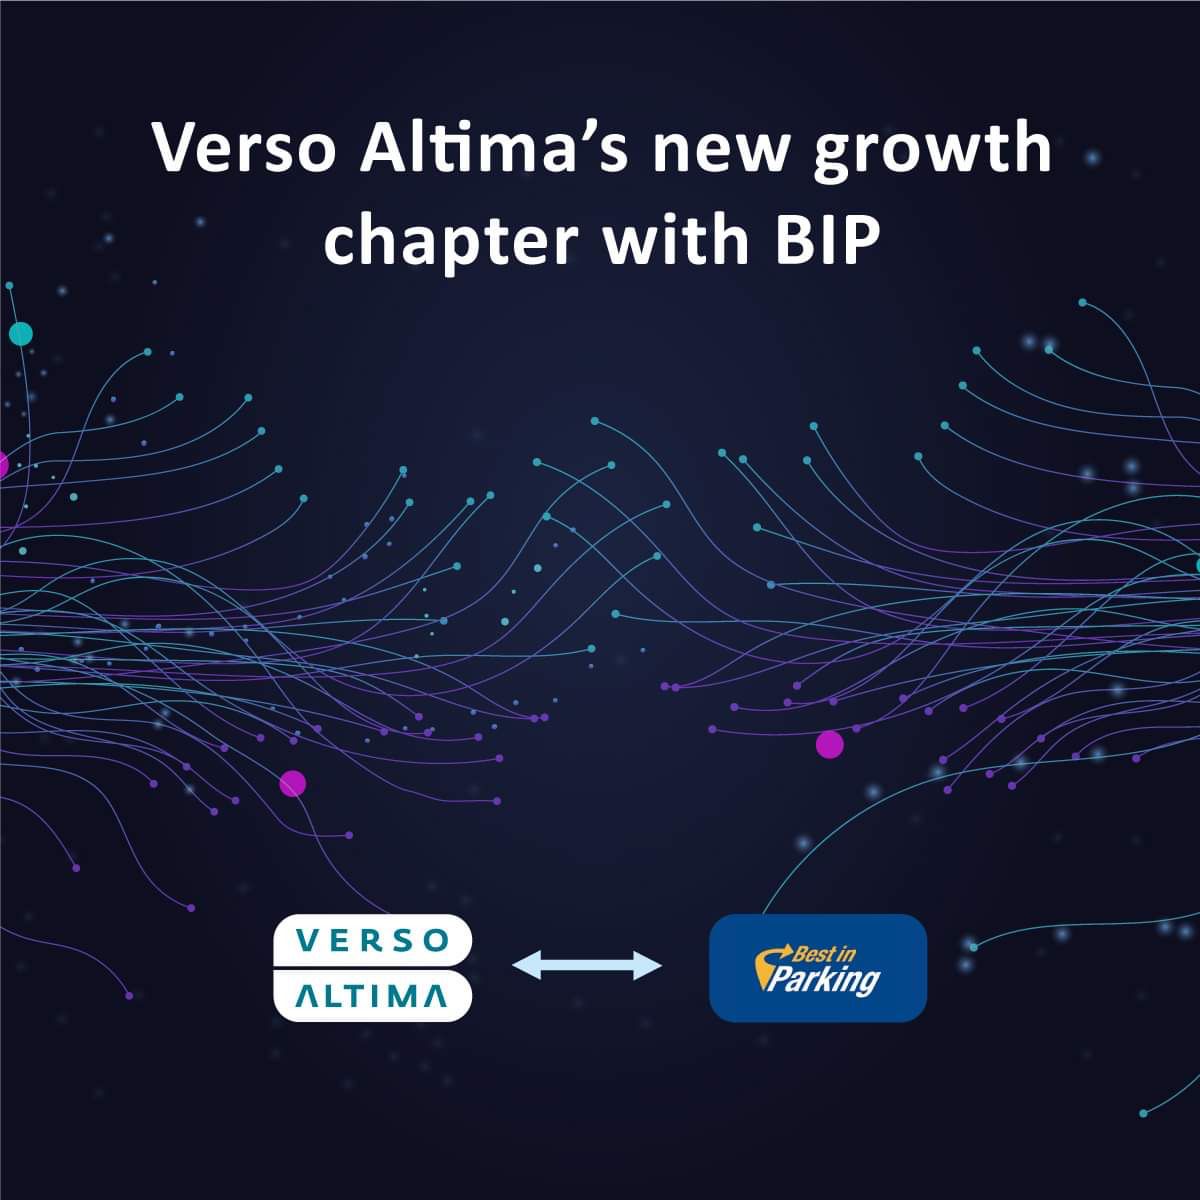 Best in Parking AG acquires 50% stake in Verso Altima